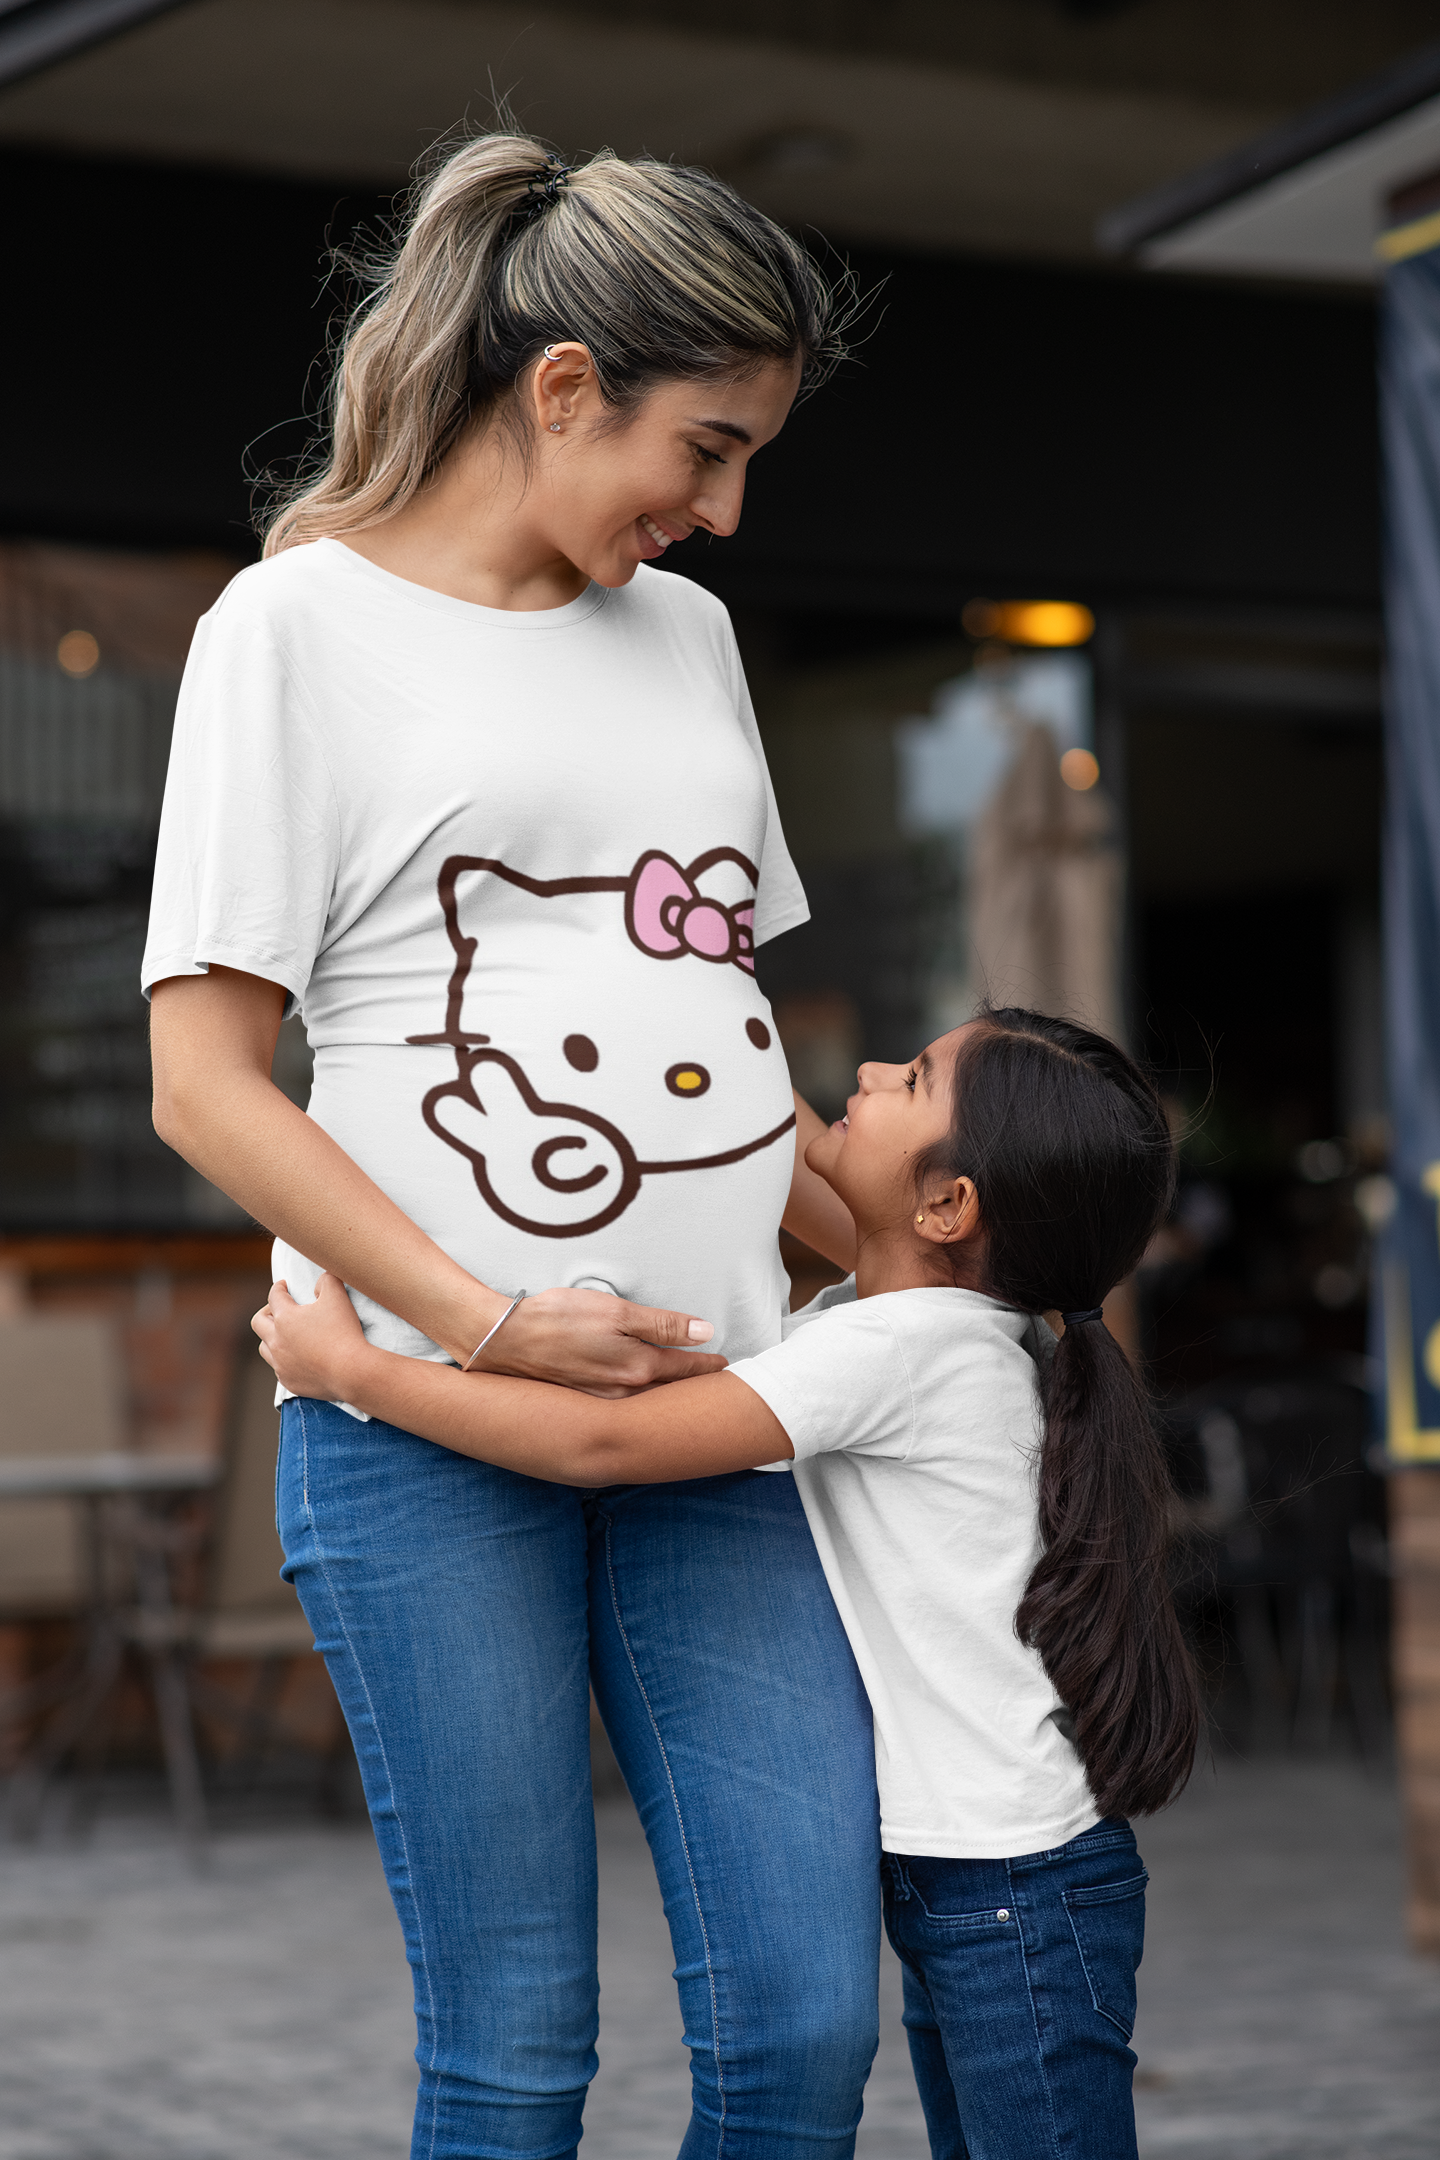 Hello Kitty Inspired With Ribbon Ladies T Shirt